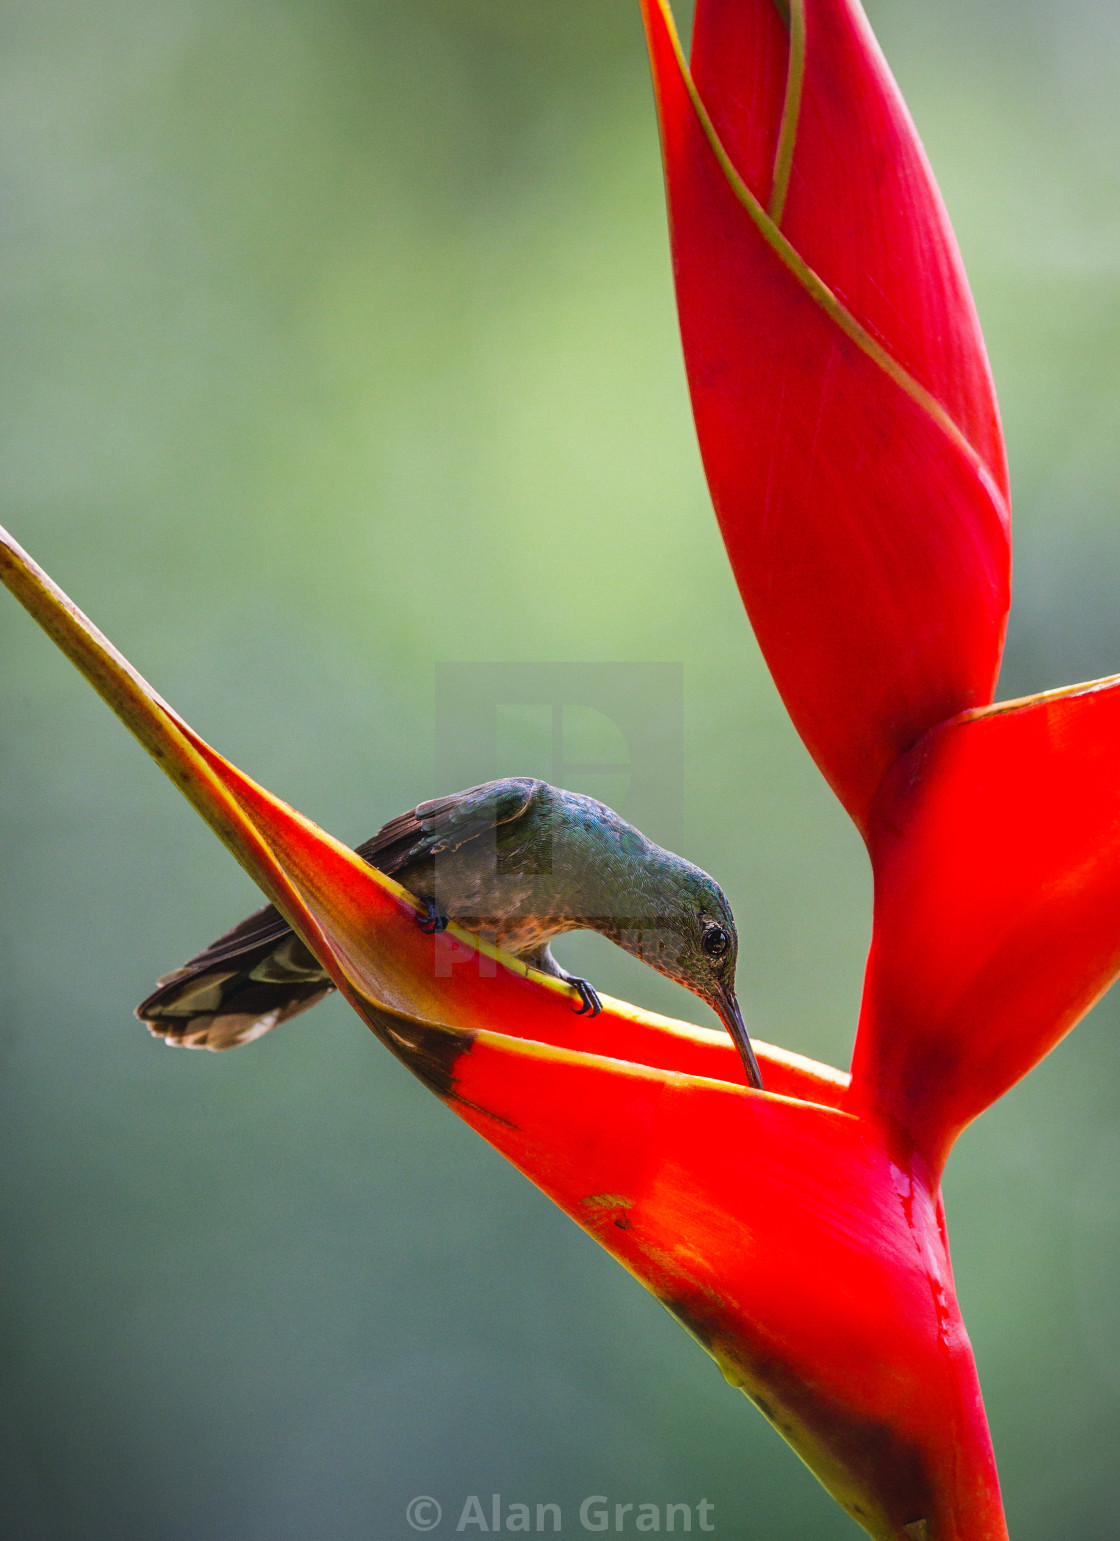 "Scaly-breasted Sabrewing drinking from a Heliconia" stock image